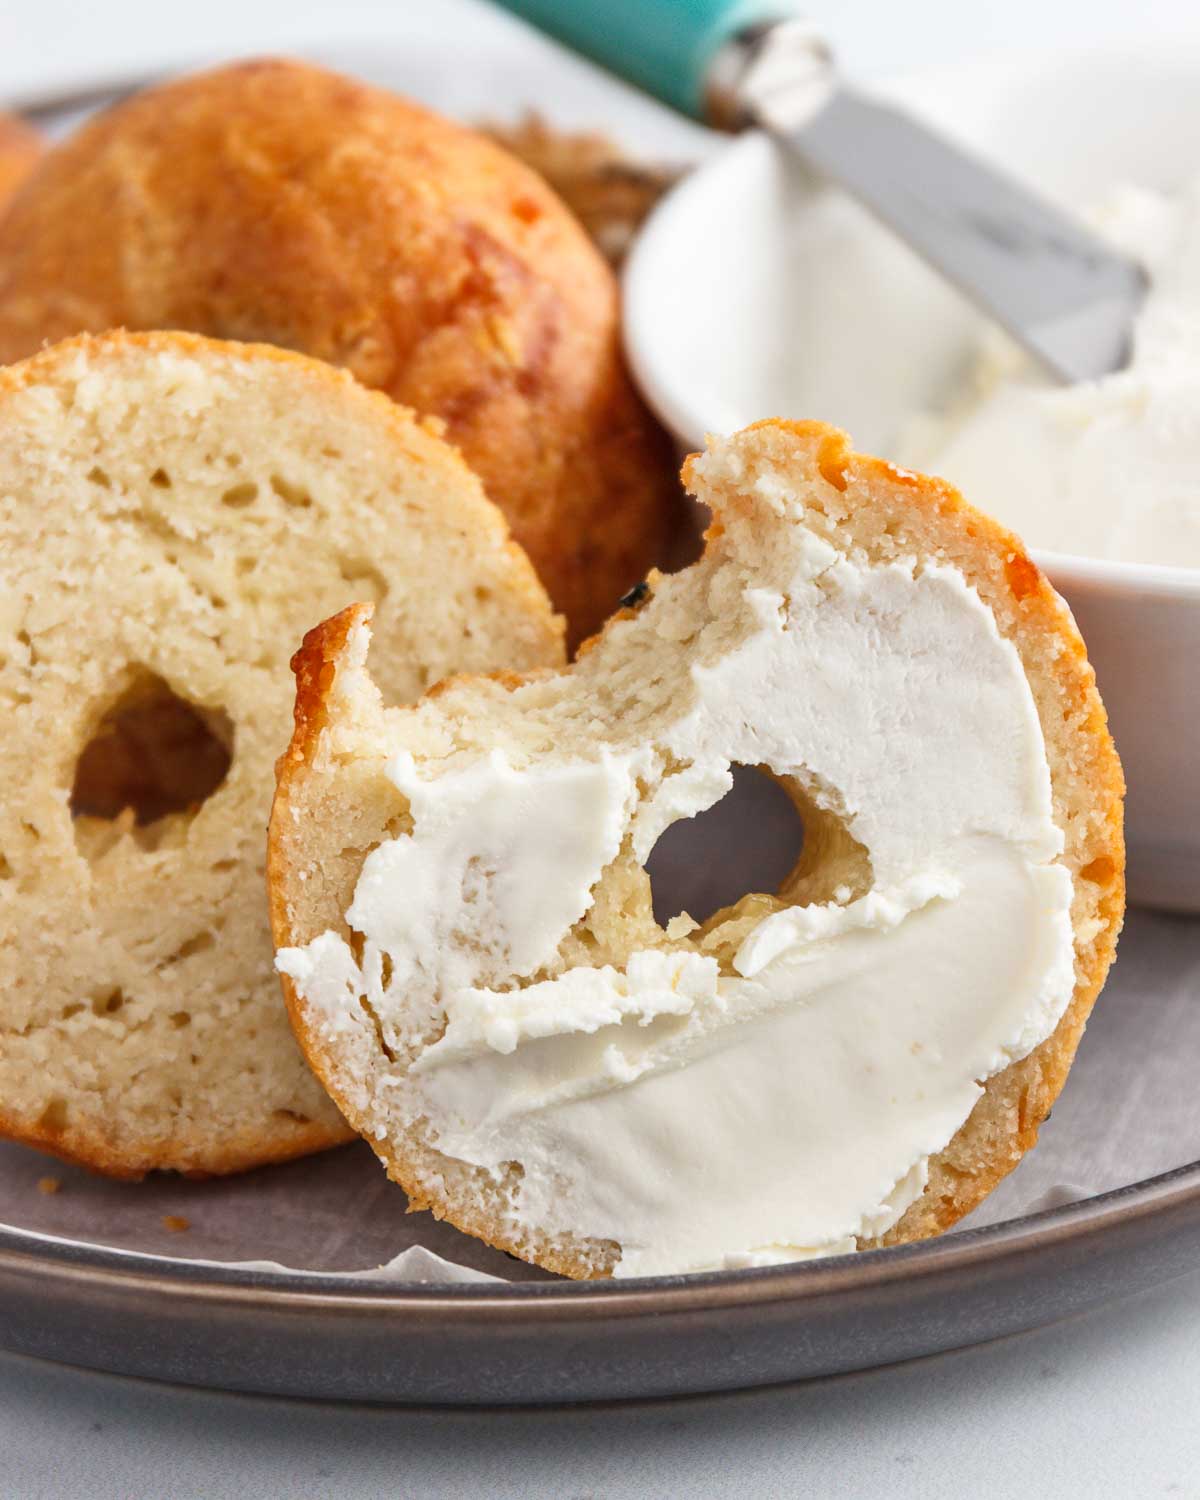 A low carb bagel half with cream cheese spread on it.